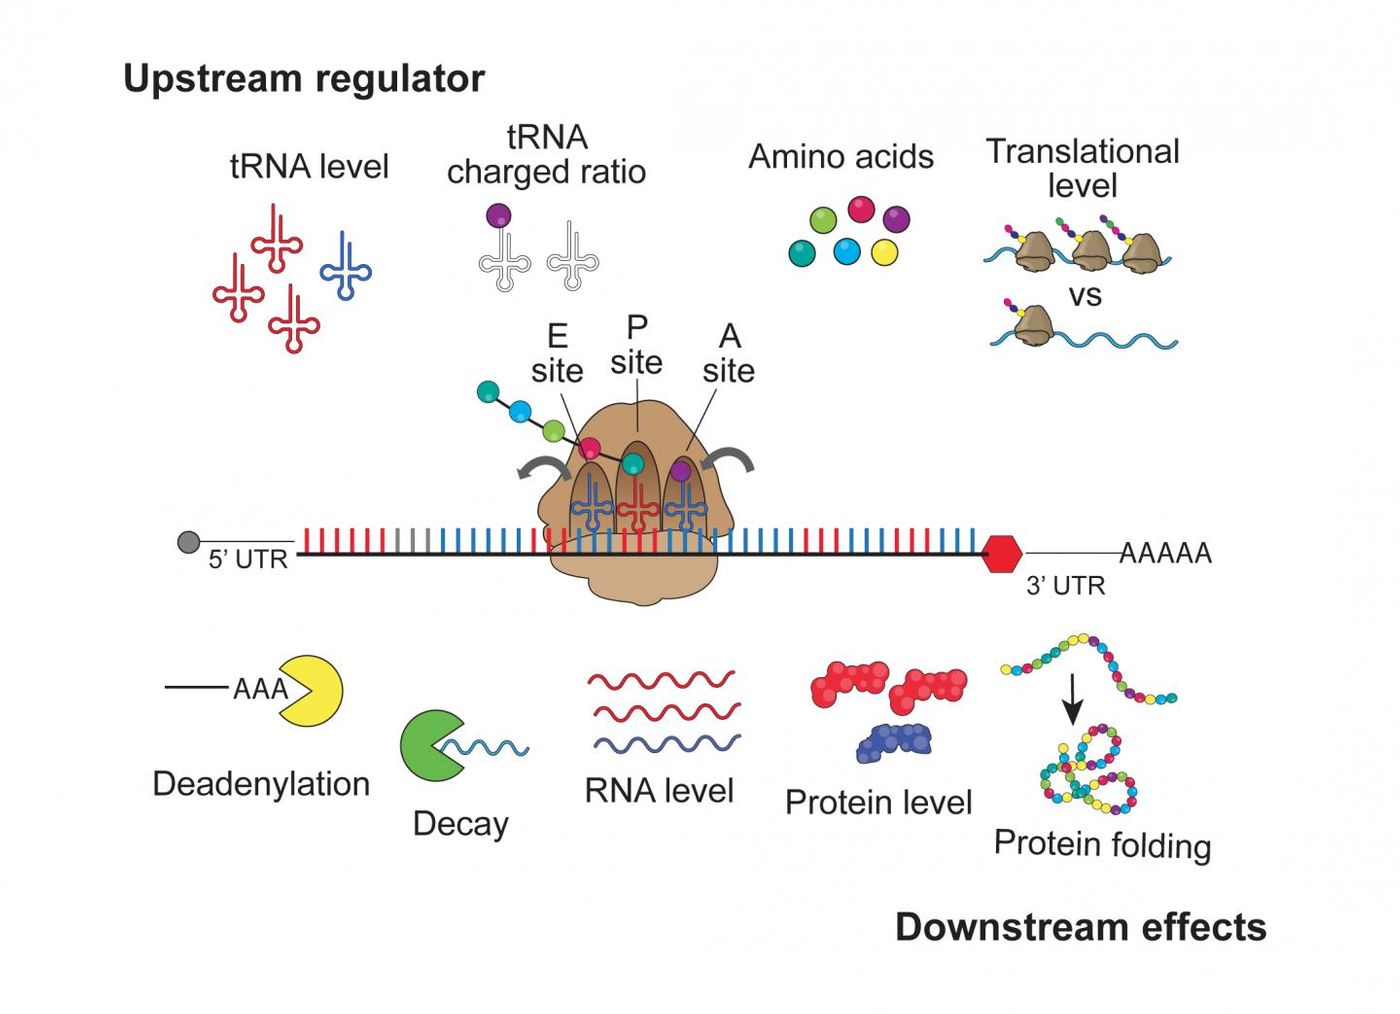 A new study using human cell lines provides insight on how instructions embedded within mRNA messages can affect mRNA levels, mRNA stability, and protein production in a translation-dependent manner. / Credit: Bazzini Lab